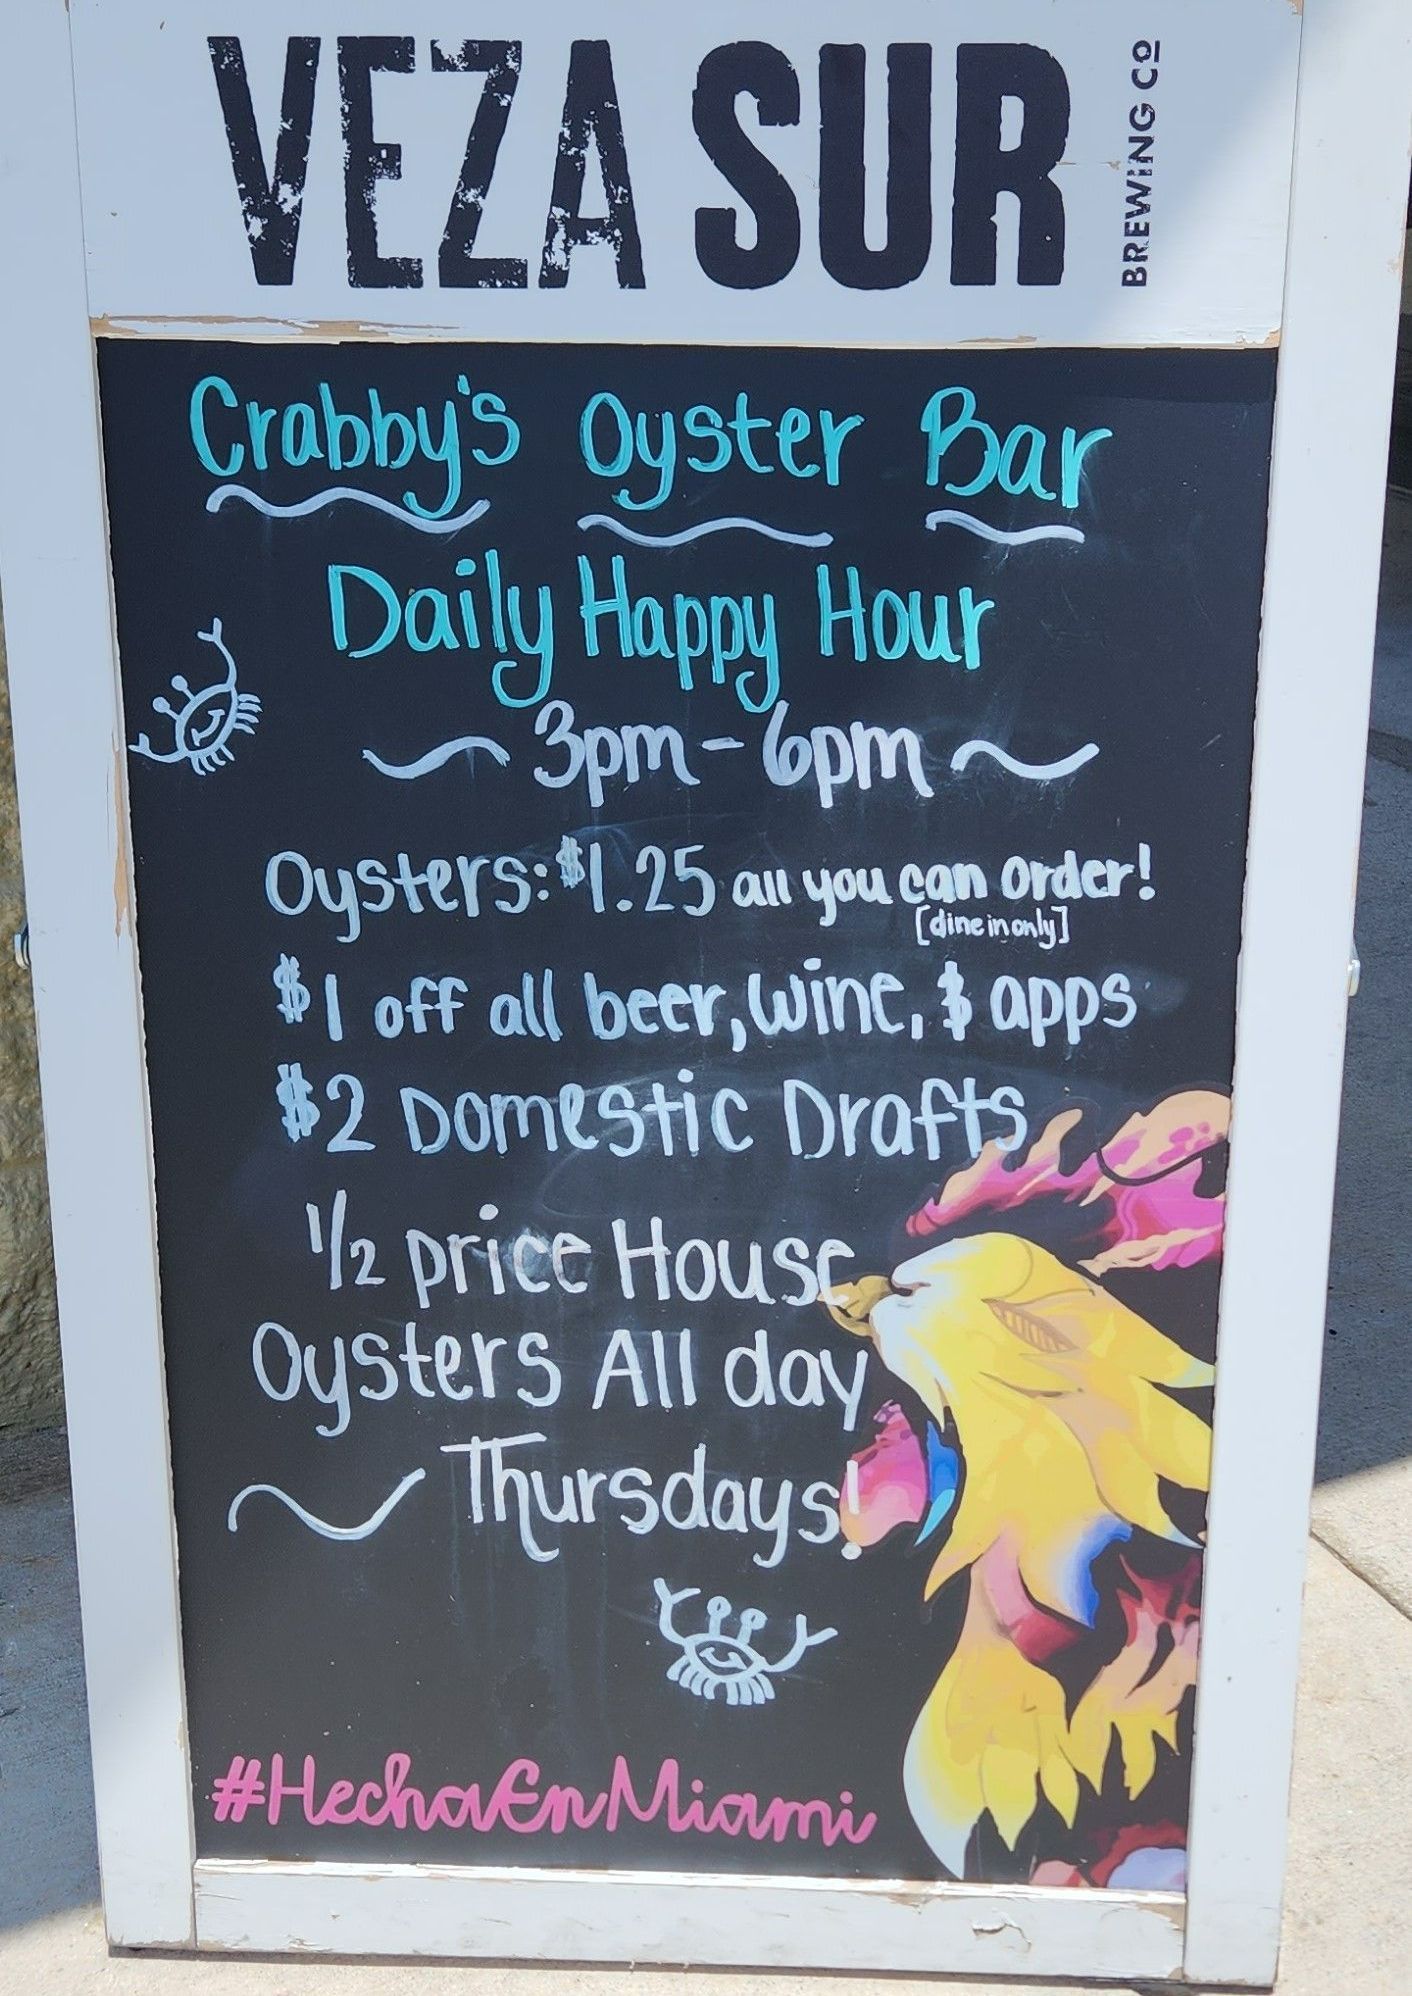 Crabby's Oyster Bar Daily Happy Hour